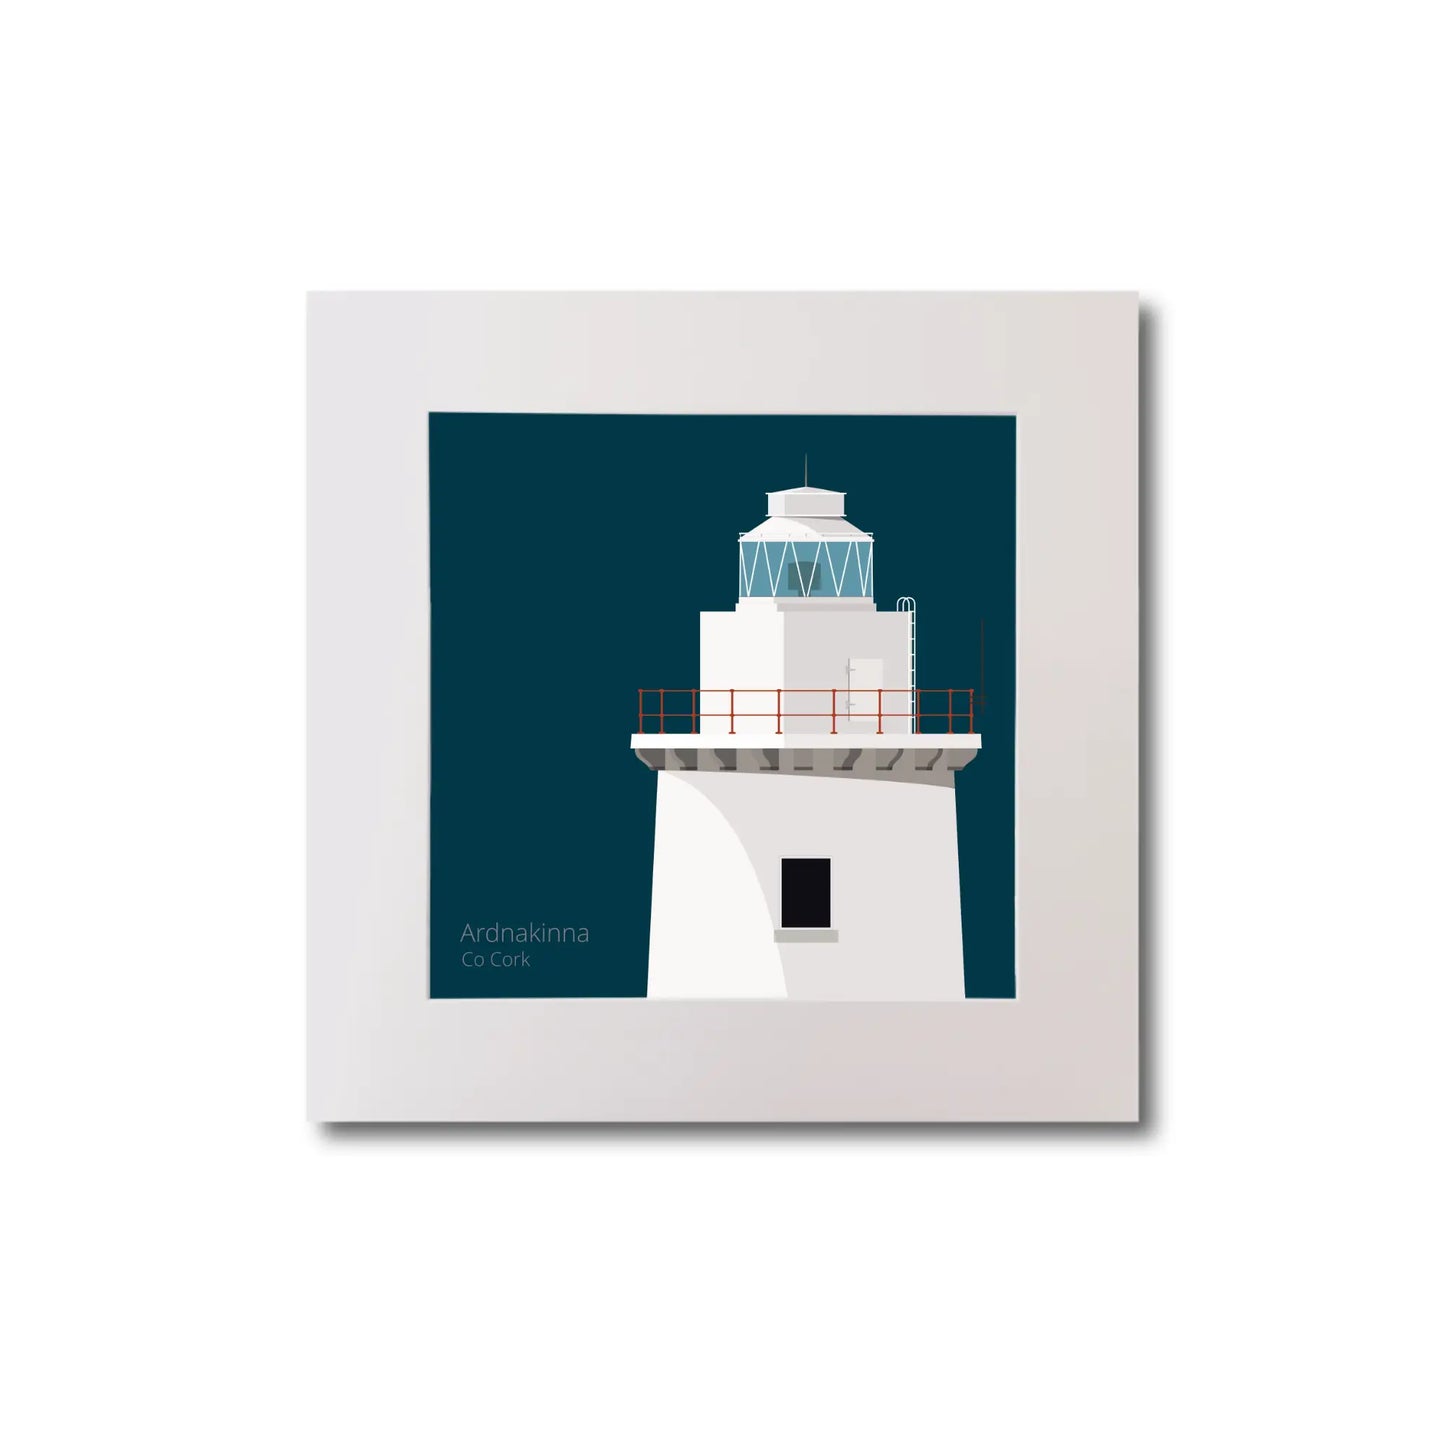 Illustration of Ardnakinna lighthouse on a midnight blue background, mounted and measuring 20x20cm.